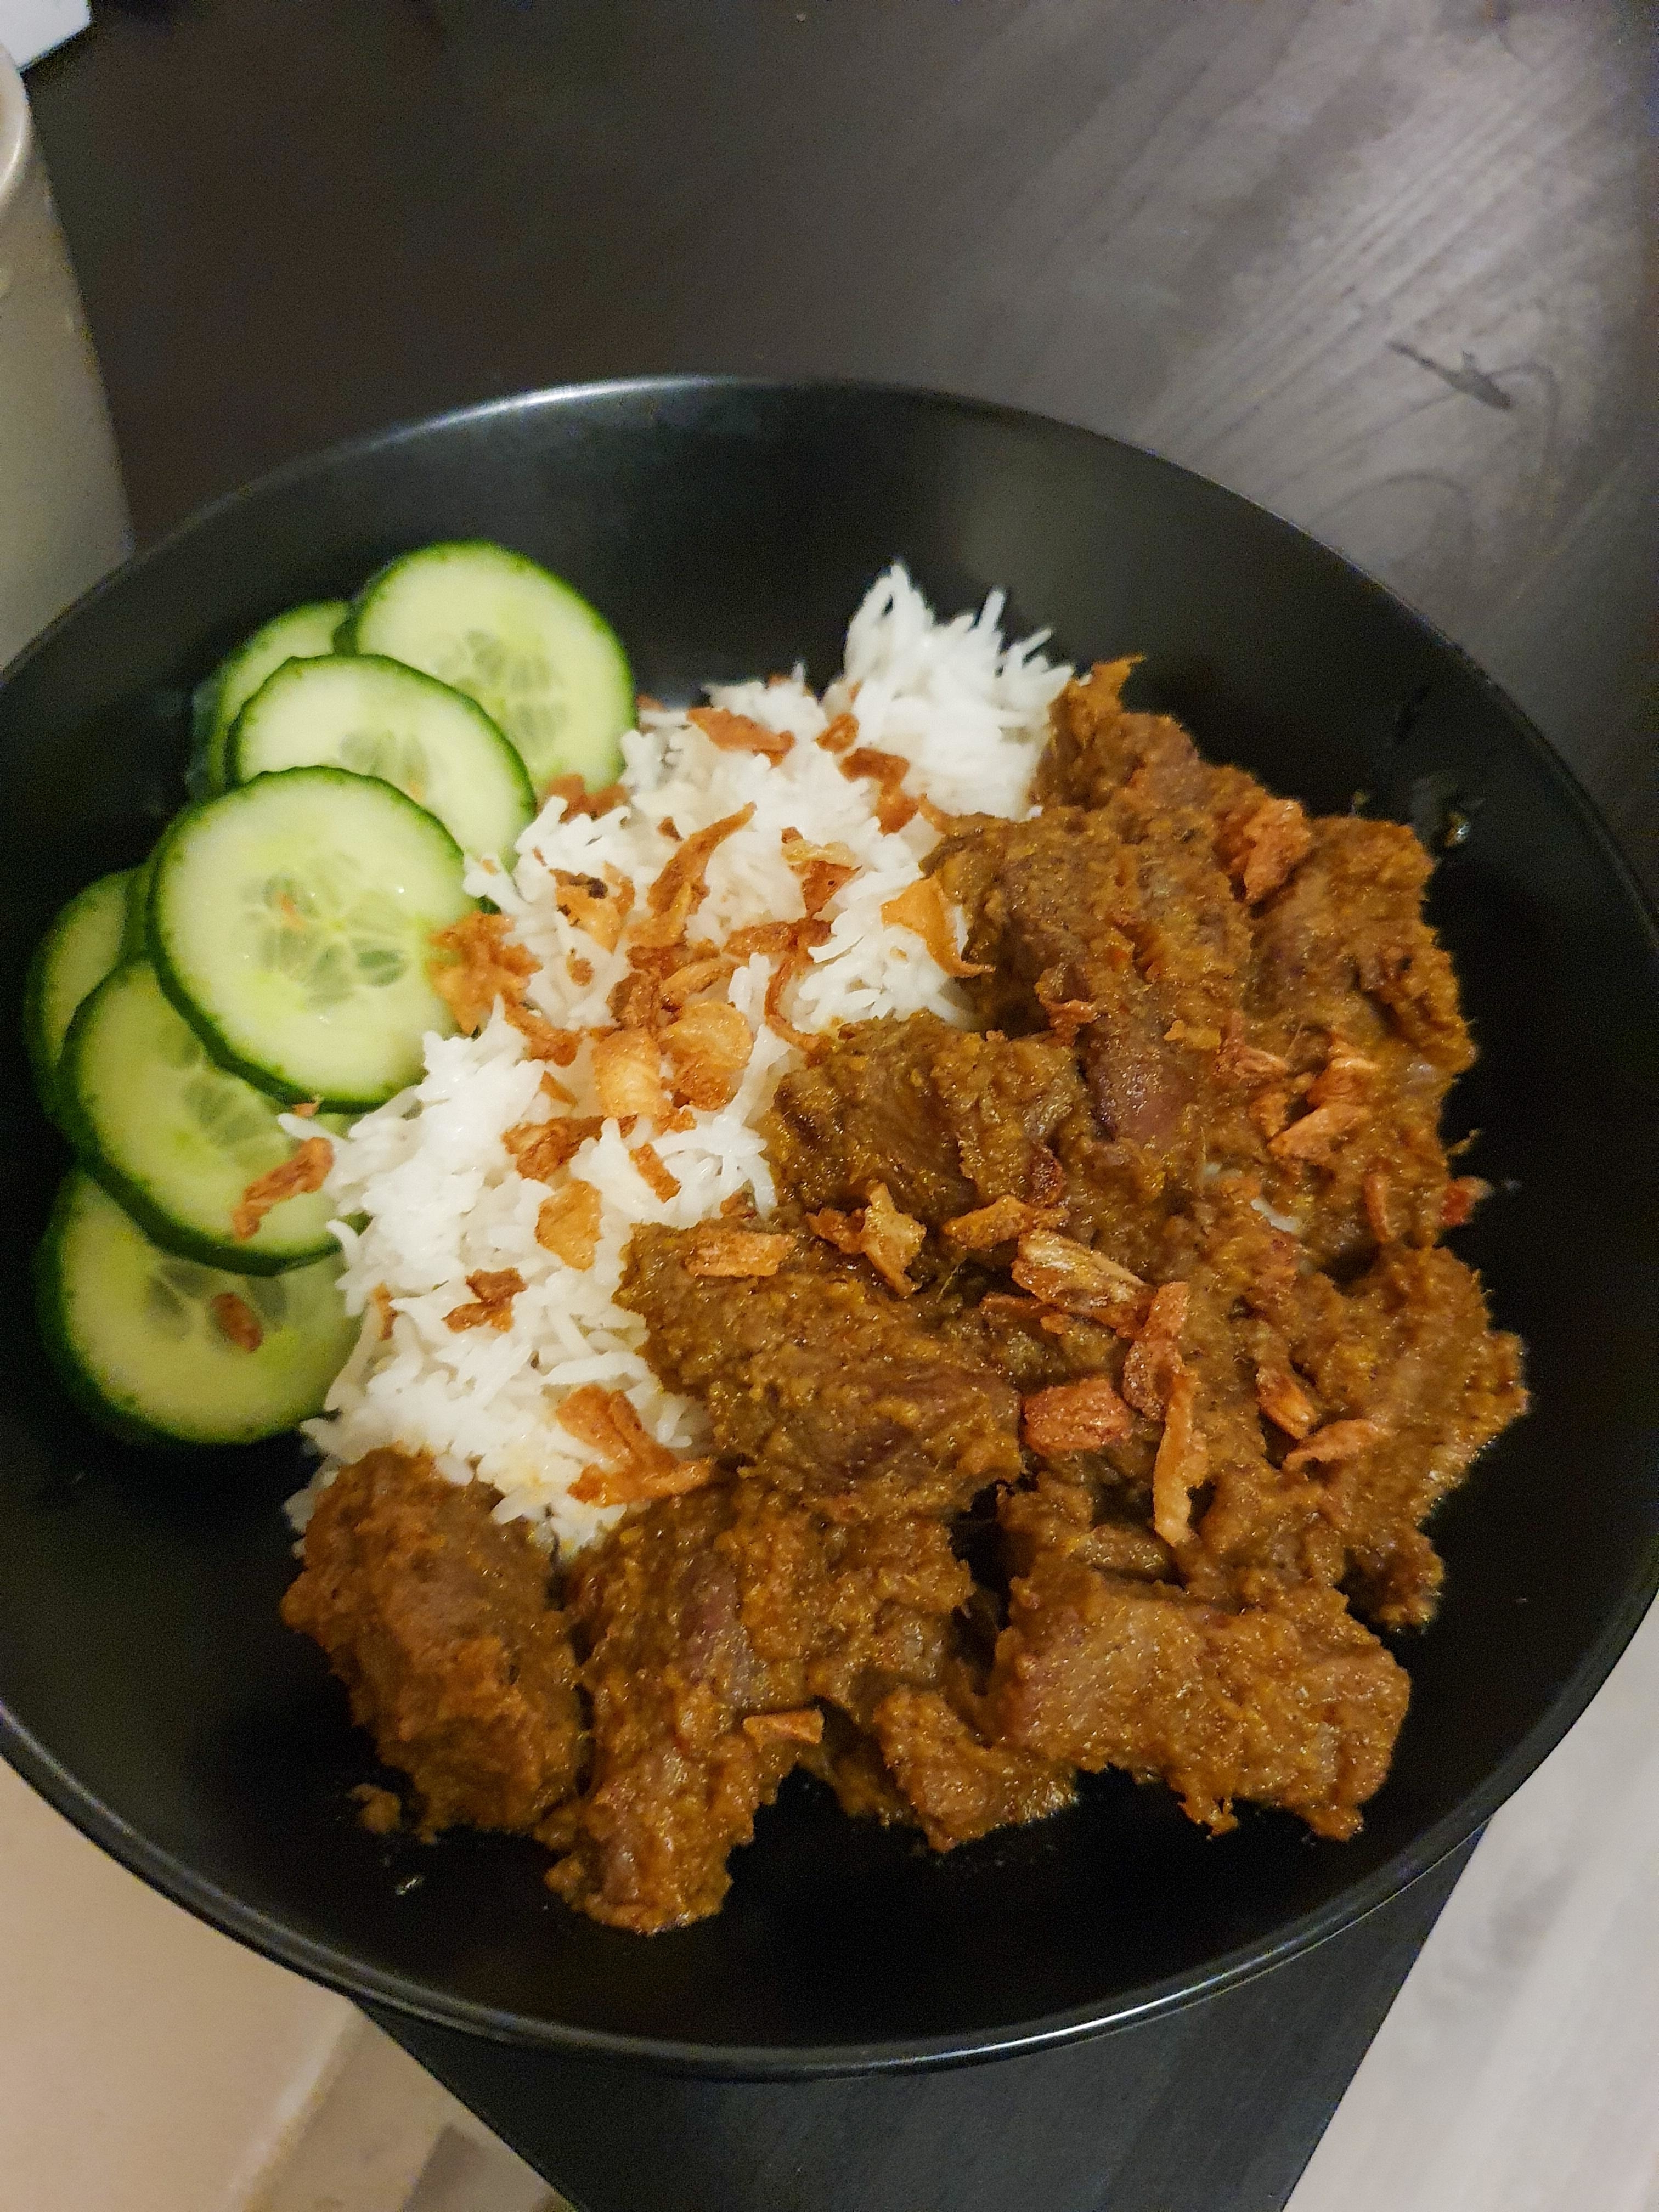 Plate of rice with beef rendang and sliced cucumbers